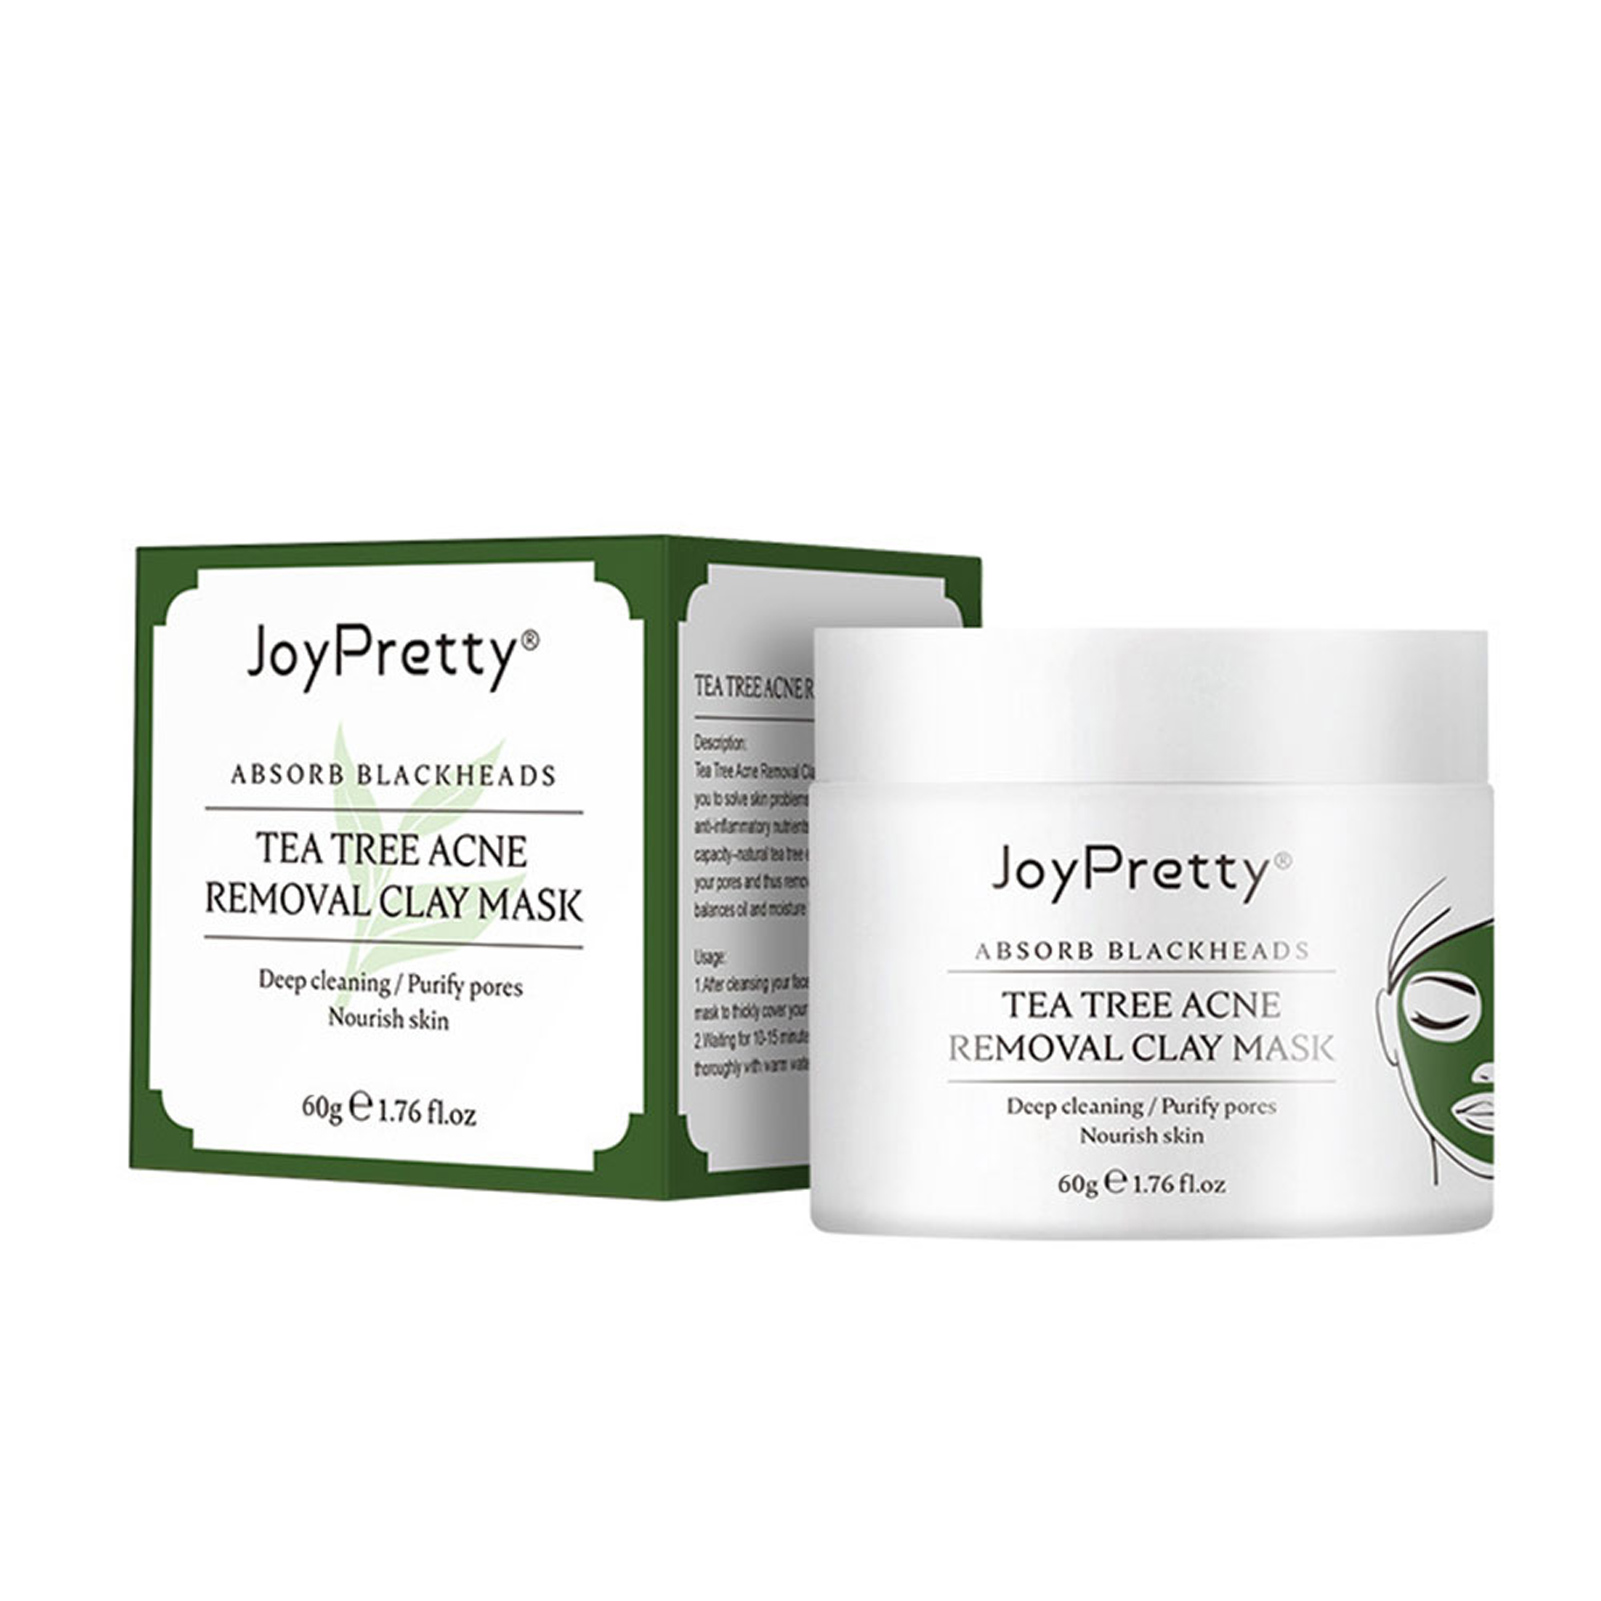 Tea Tree Clay Mask for Clear Skin